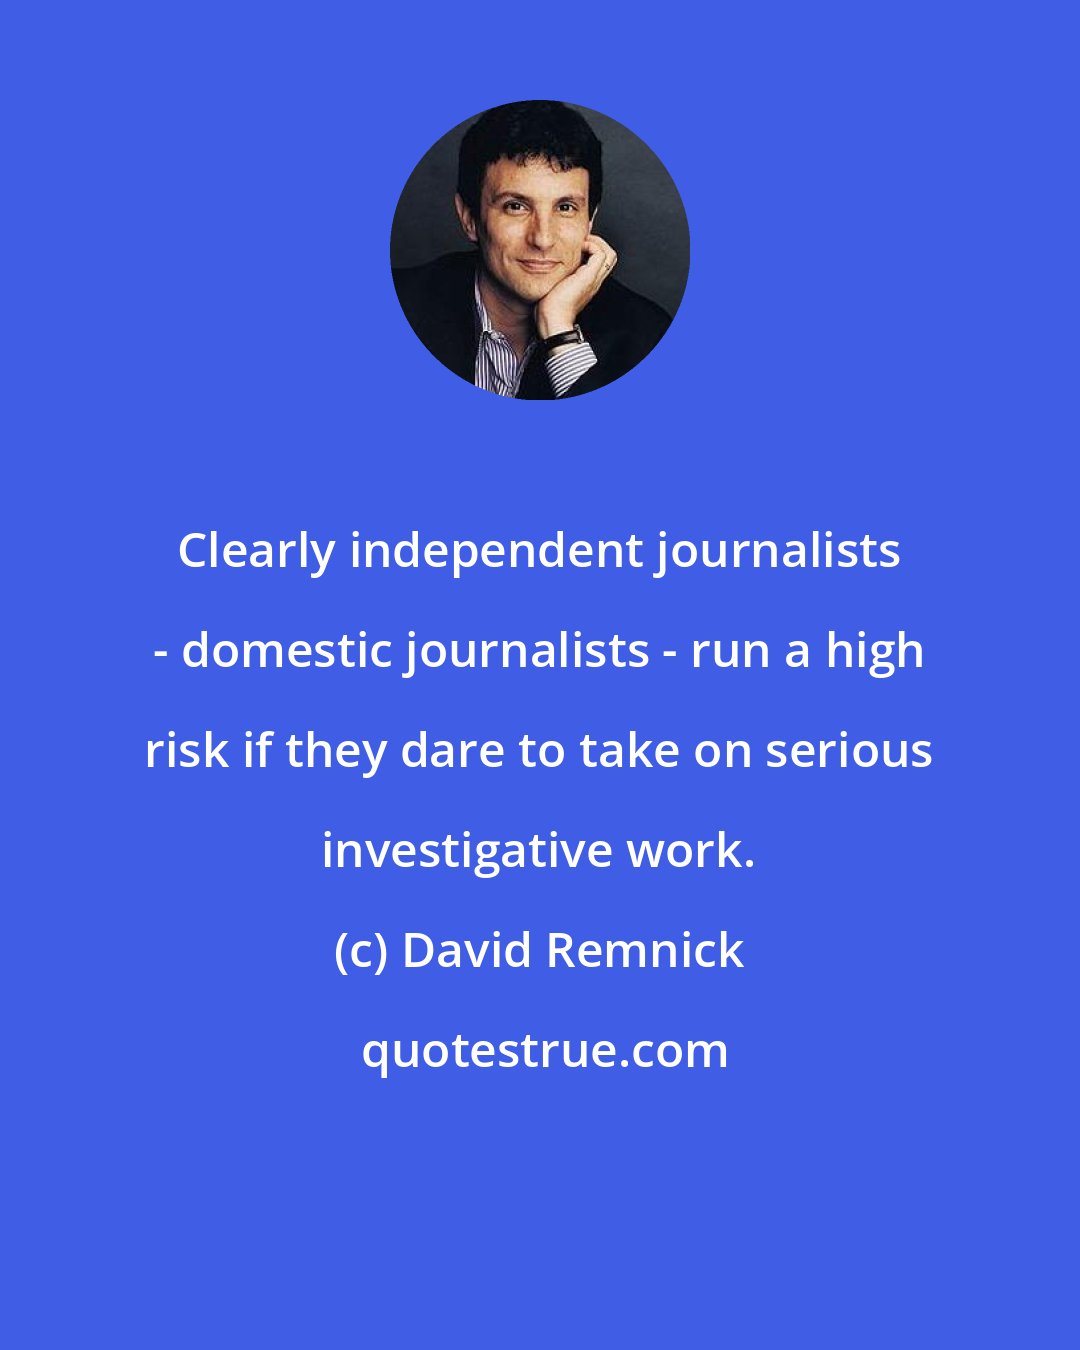 David Remnick: Clearly independent journalists - domestic journalists - run a high risk if they dare to take on serious investigative work.